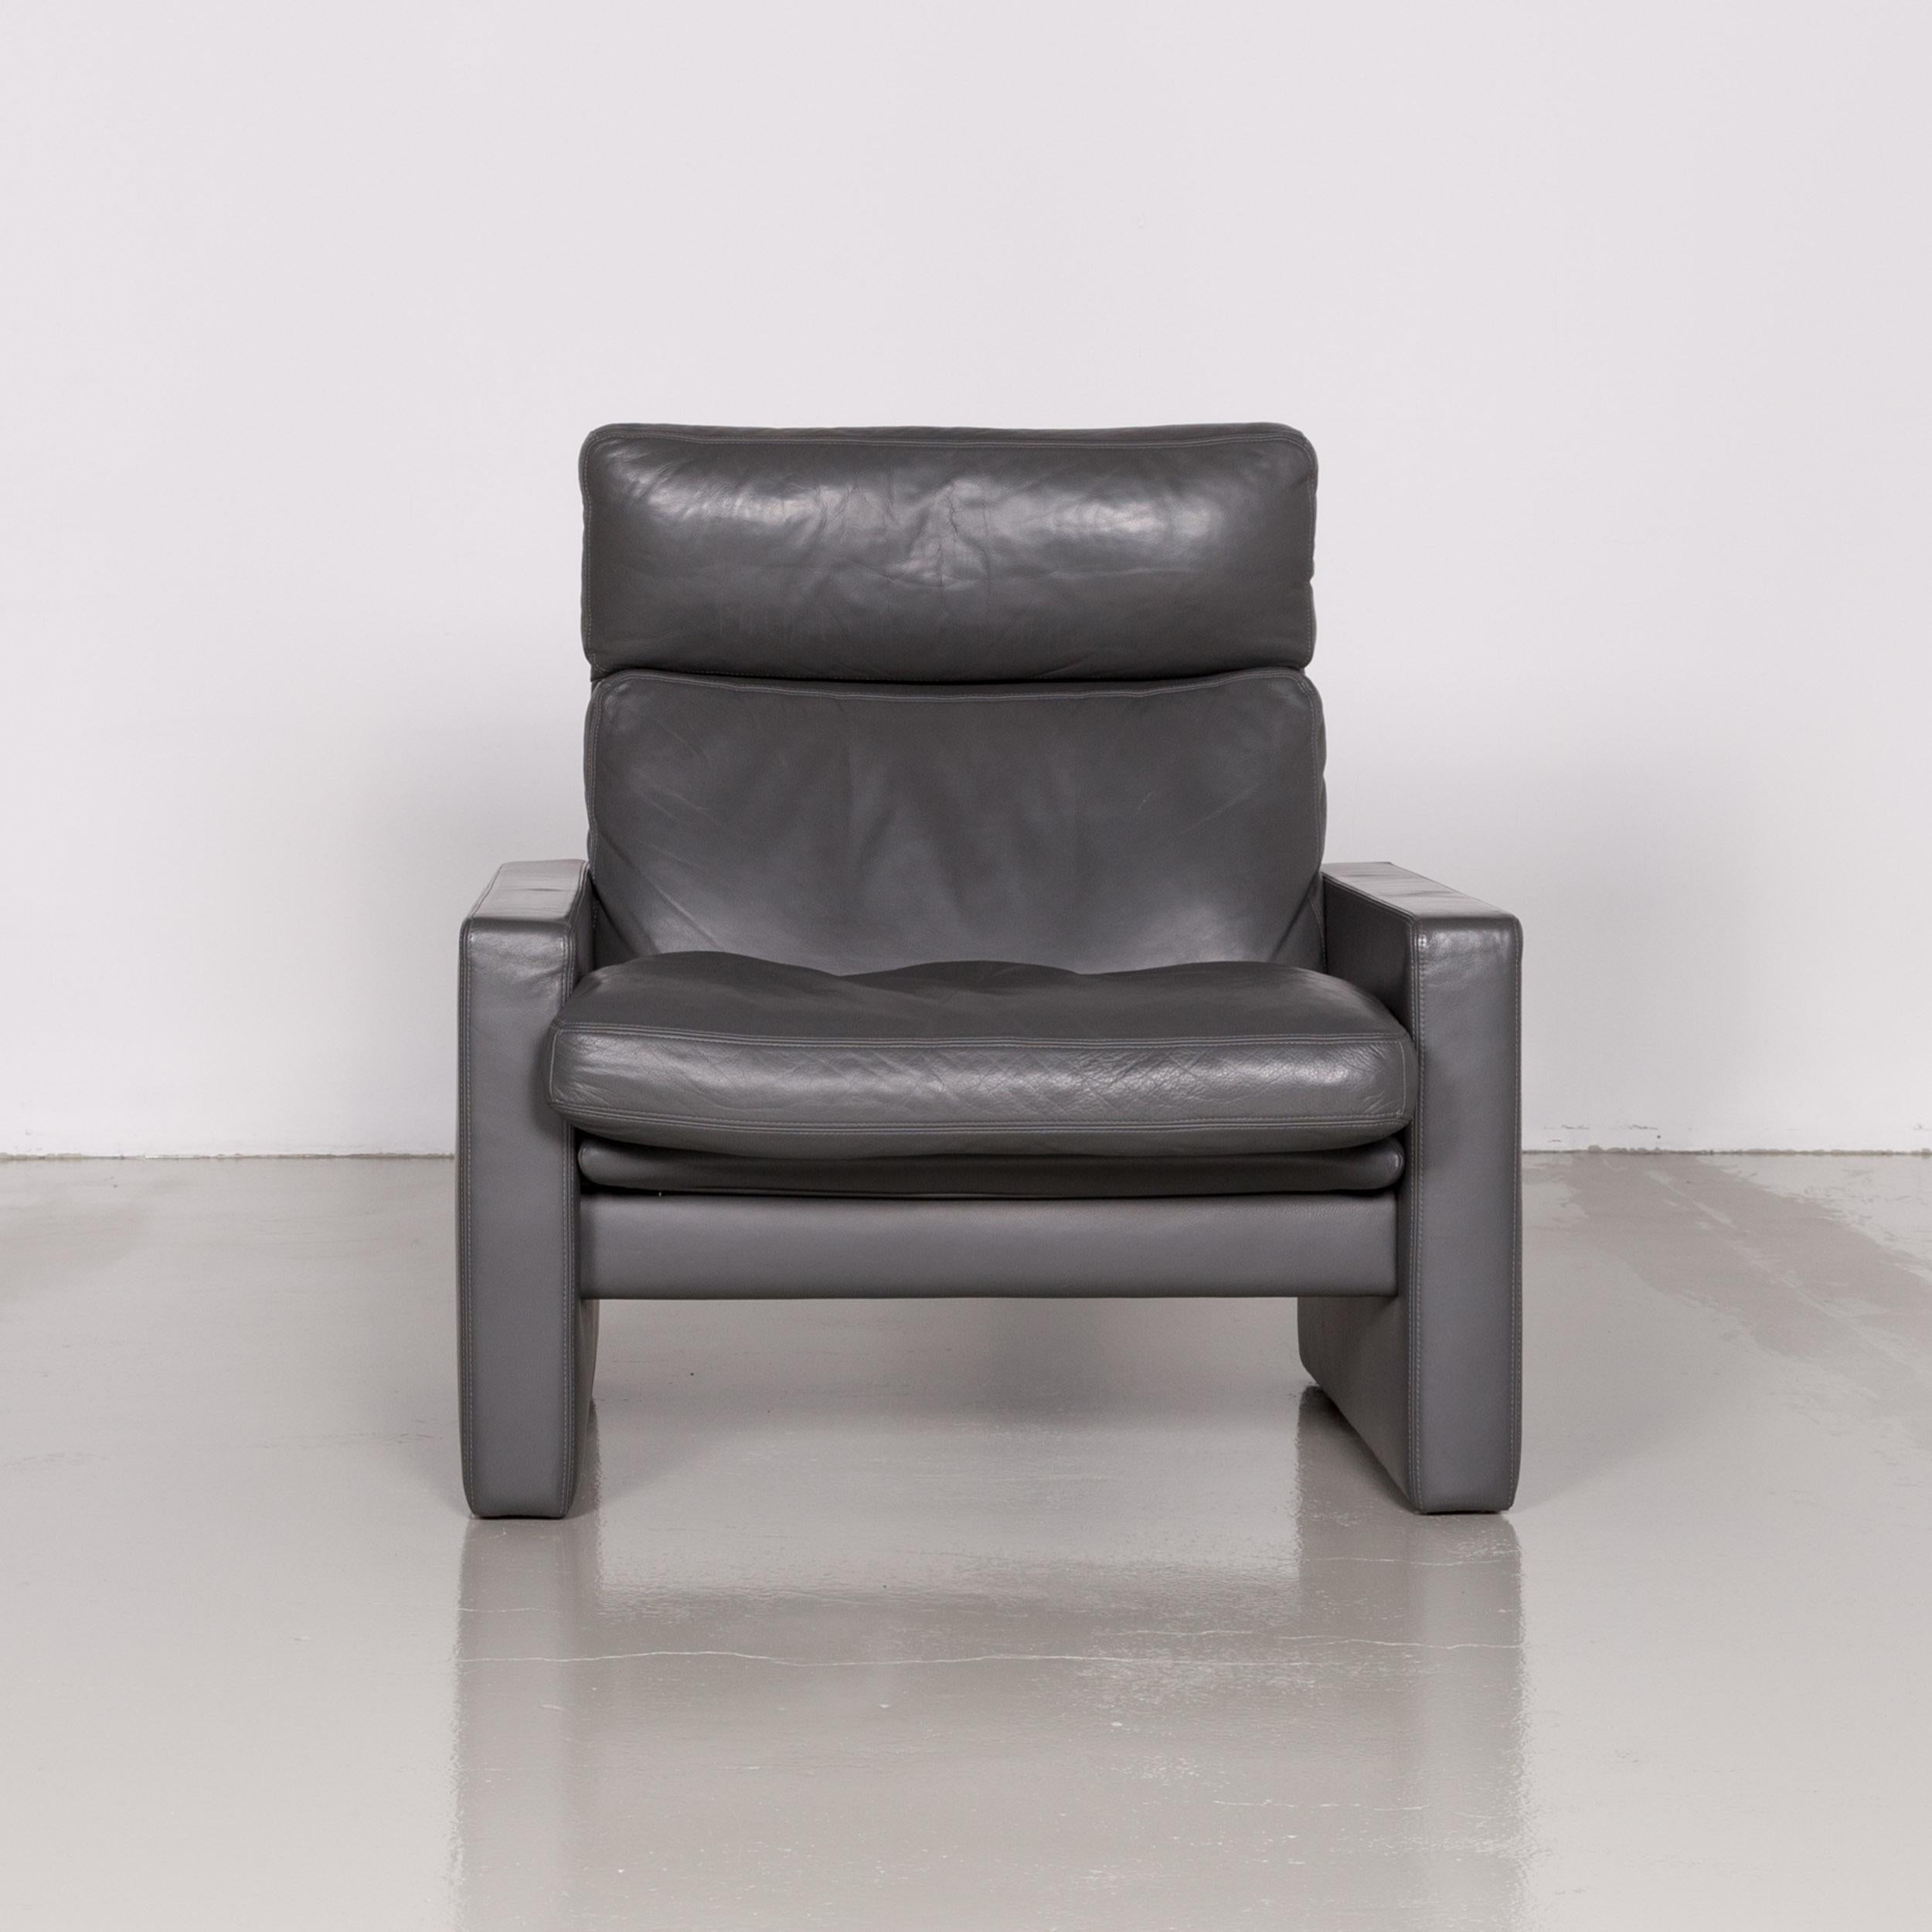 We bring to you an Erpo Manhattan designer leather armchair anthracite gray genuine leather

Product measurements in centimeters:

Depth 90
Width 90
Height 90
Seat-height 45
Rest-height 50
Seat-depth 60
Seat-width 70
Back-height 60.
  
 